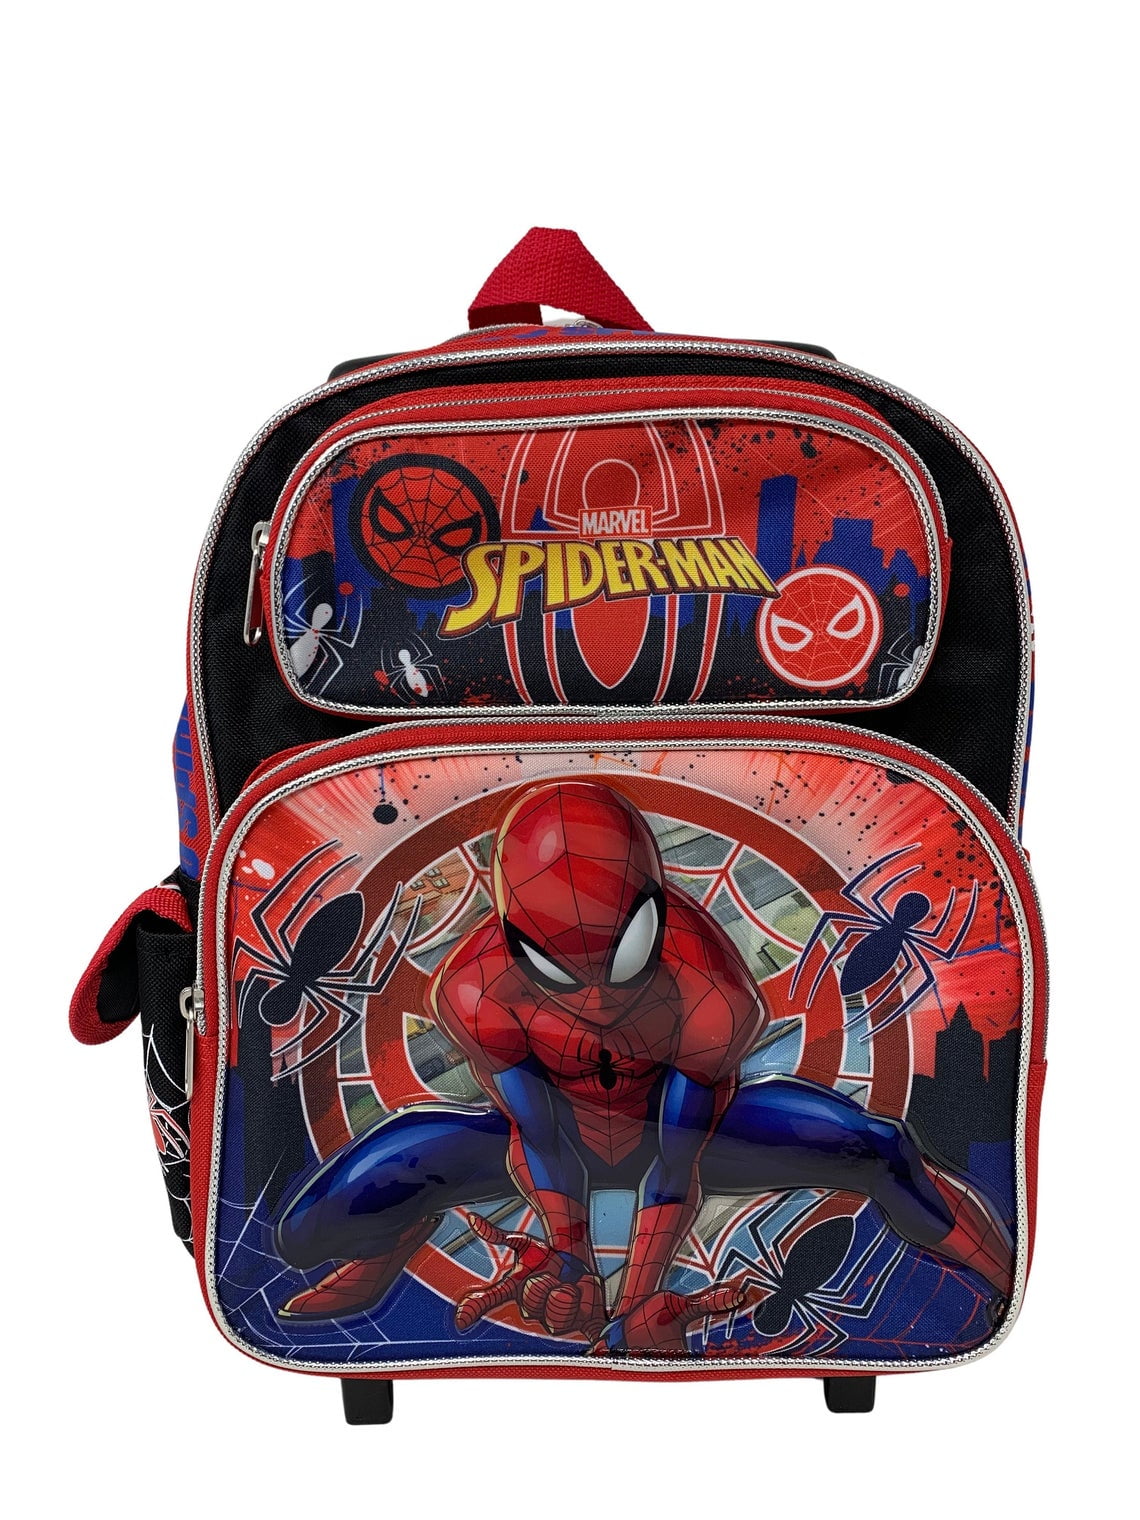 Spiderman Large 16 inches Rolling Backpack - Walmart.com